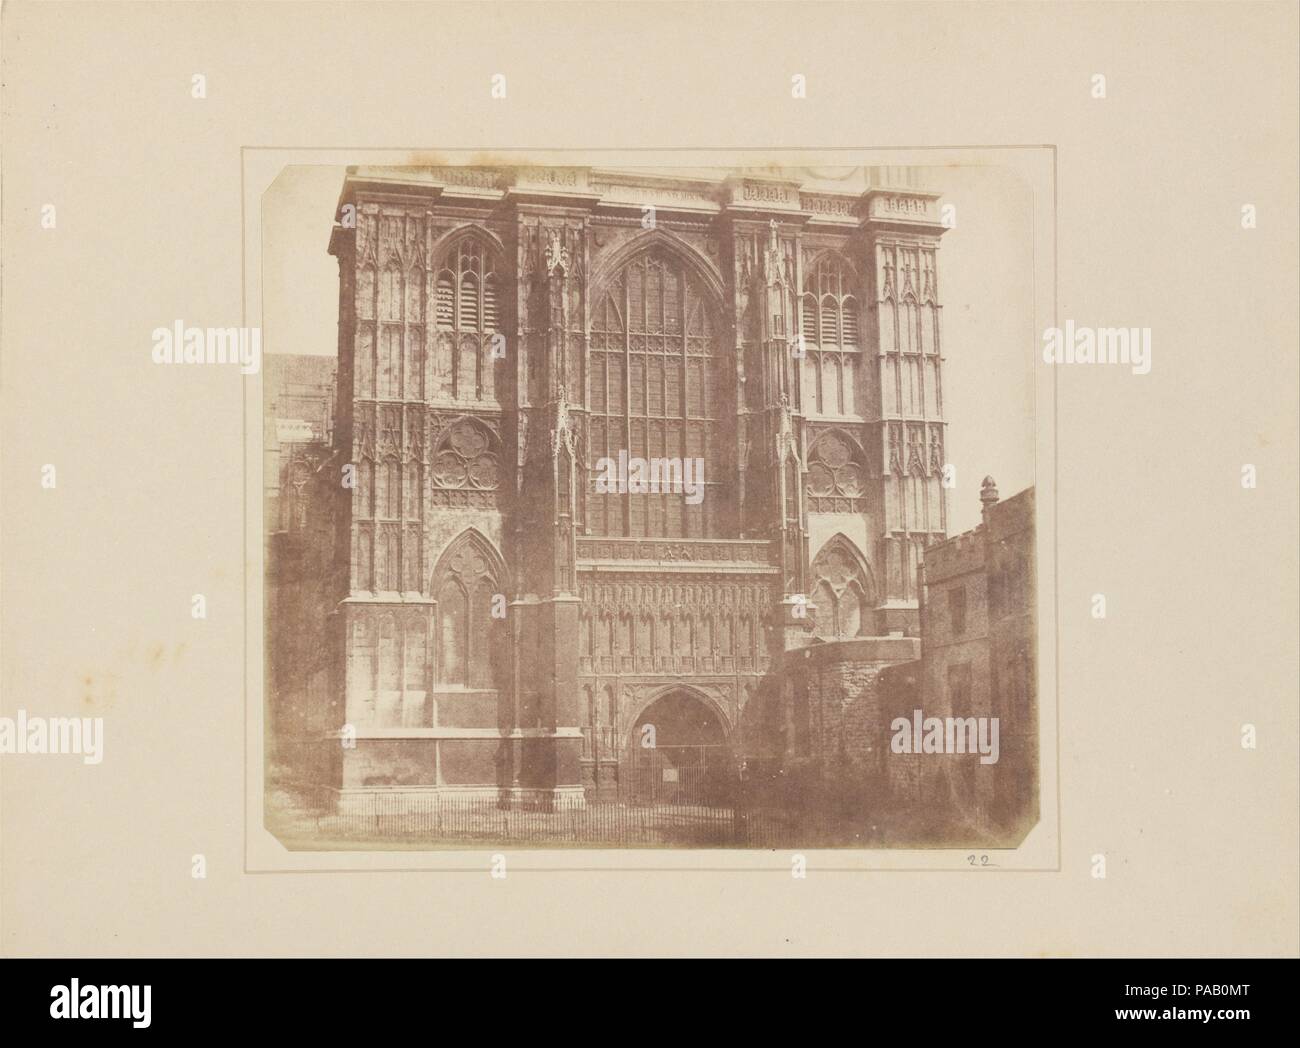 Westminster Abbey. Artist: Nicolaas Henneman (Dutch, Heemskerk 1813-1898 London). Date: before May 1845.  Talbot's negative-positive photographic process, first made public in 1839, would change the dissemination of knowledge as had no other invention since movable type.  To demonstrate the paper photograph's potential for widespread distribution--its chief advantage over the contemporaneous French daguerreotype--Talbot produced The Pencil of Nature, the first commercially published book illustrated with photographs.  With extraordinary prescience, Talbot's images and brief texts proposed a wi Stock Photo